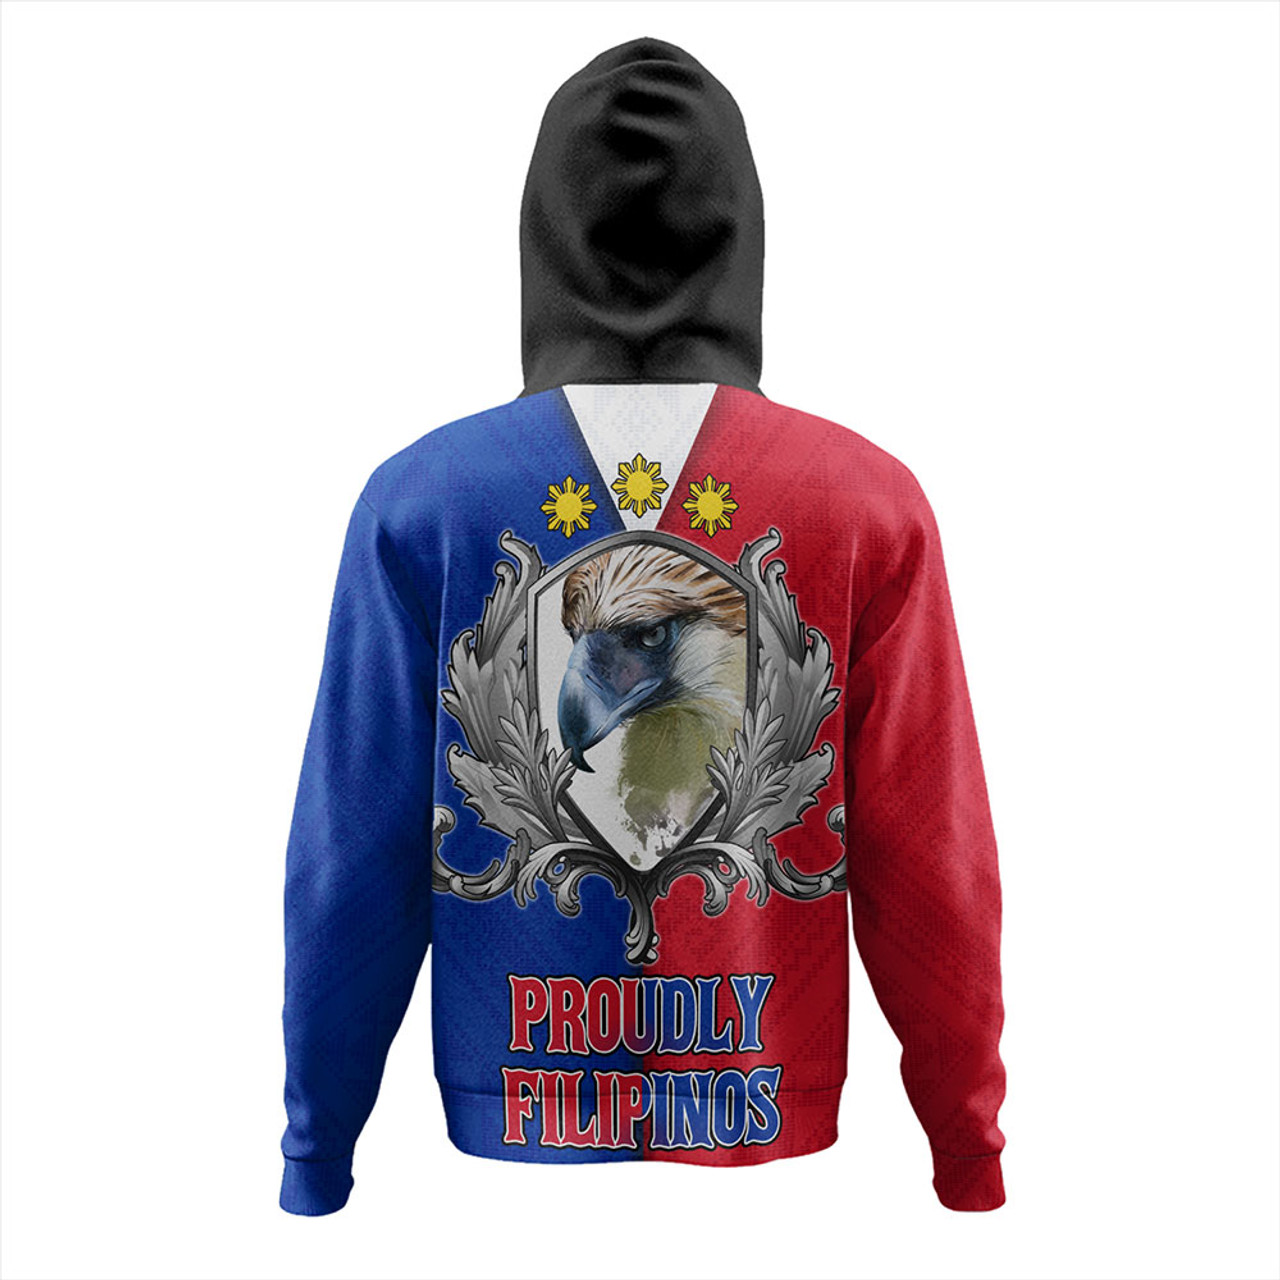 Philippines Filipinos Hoodie The Philippine Eagle With Traditional Patterns